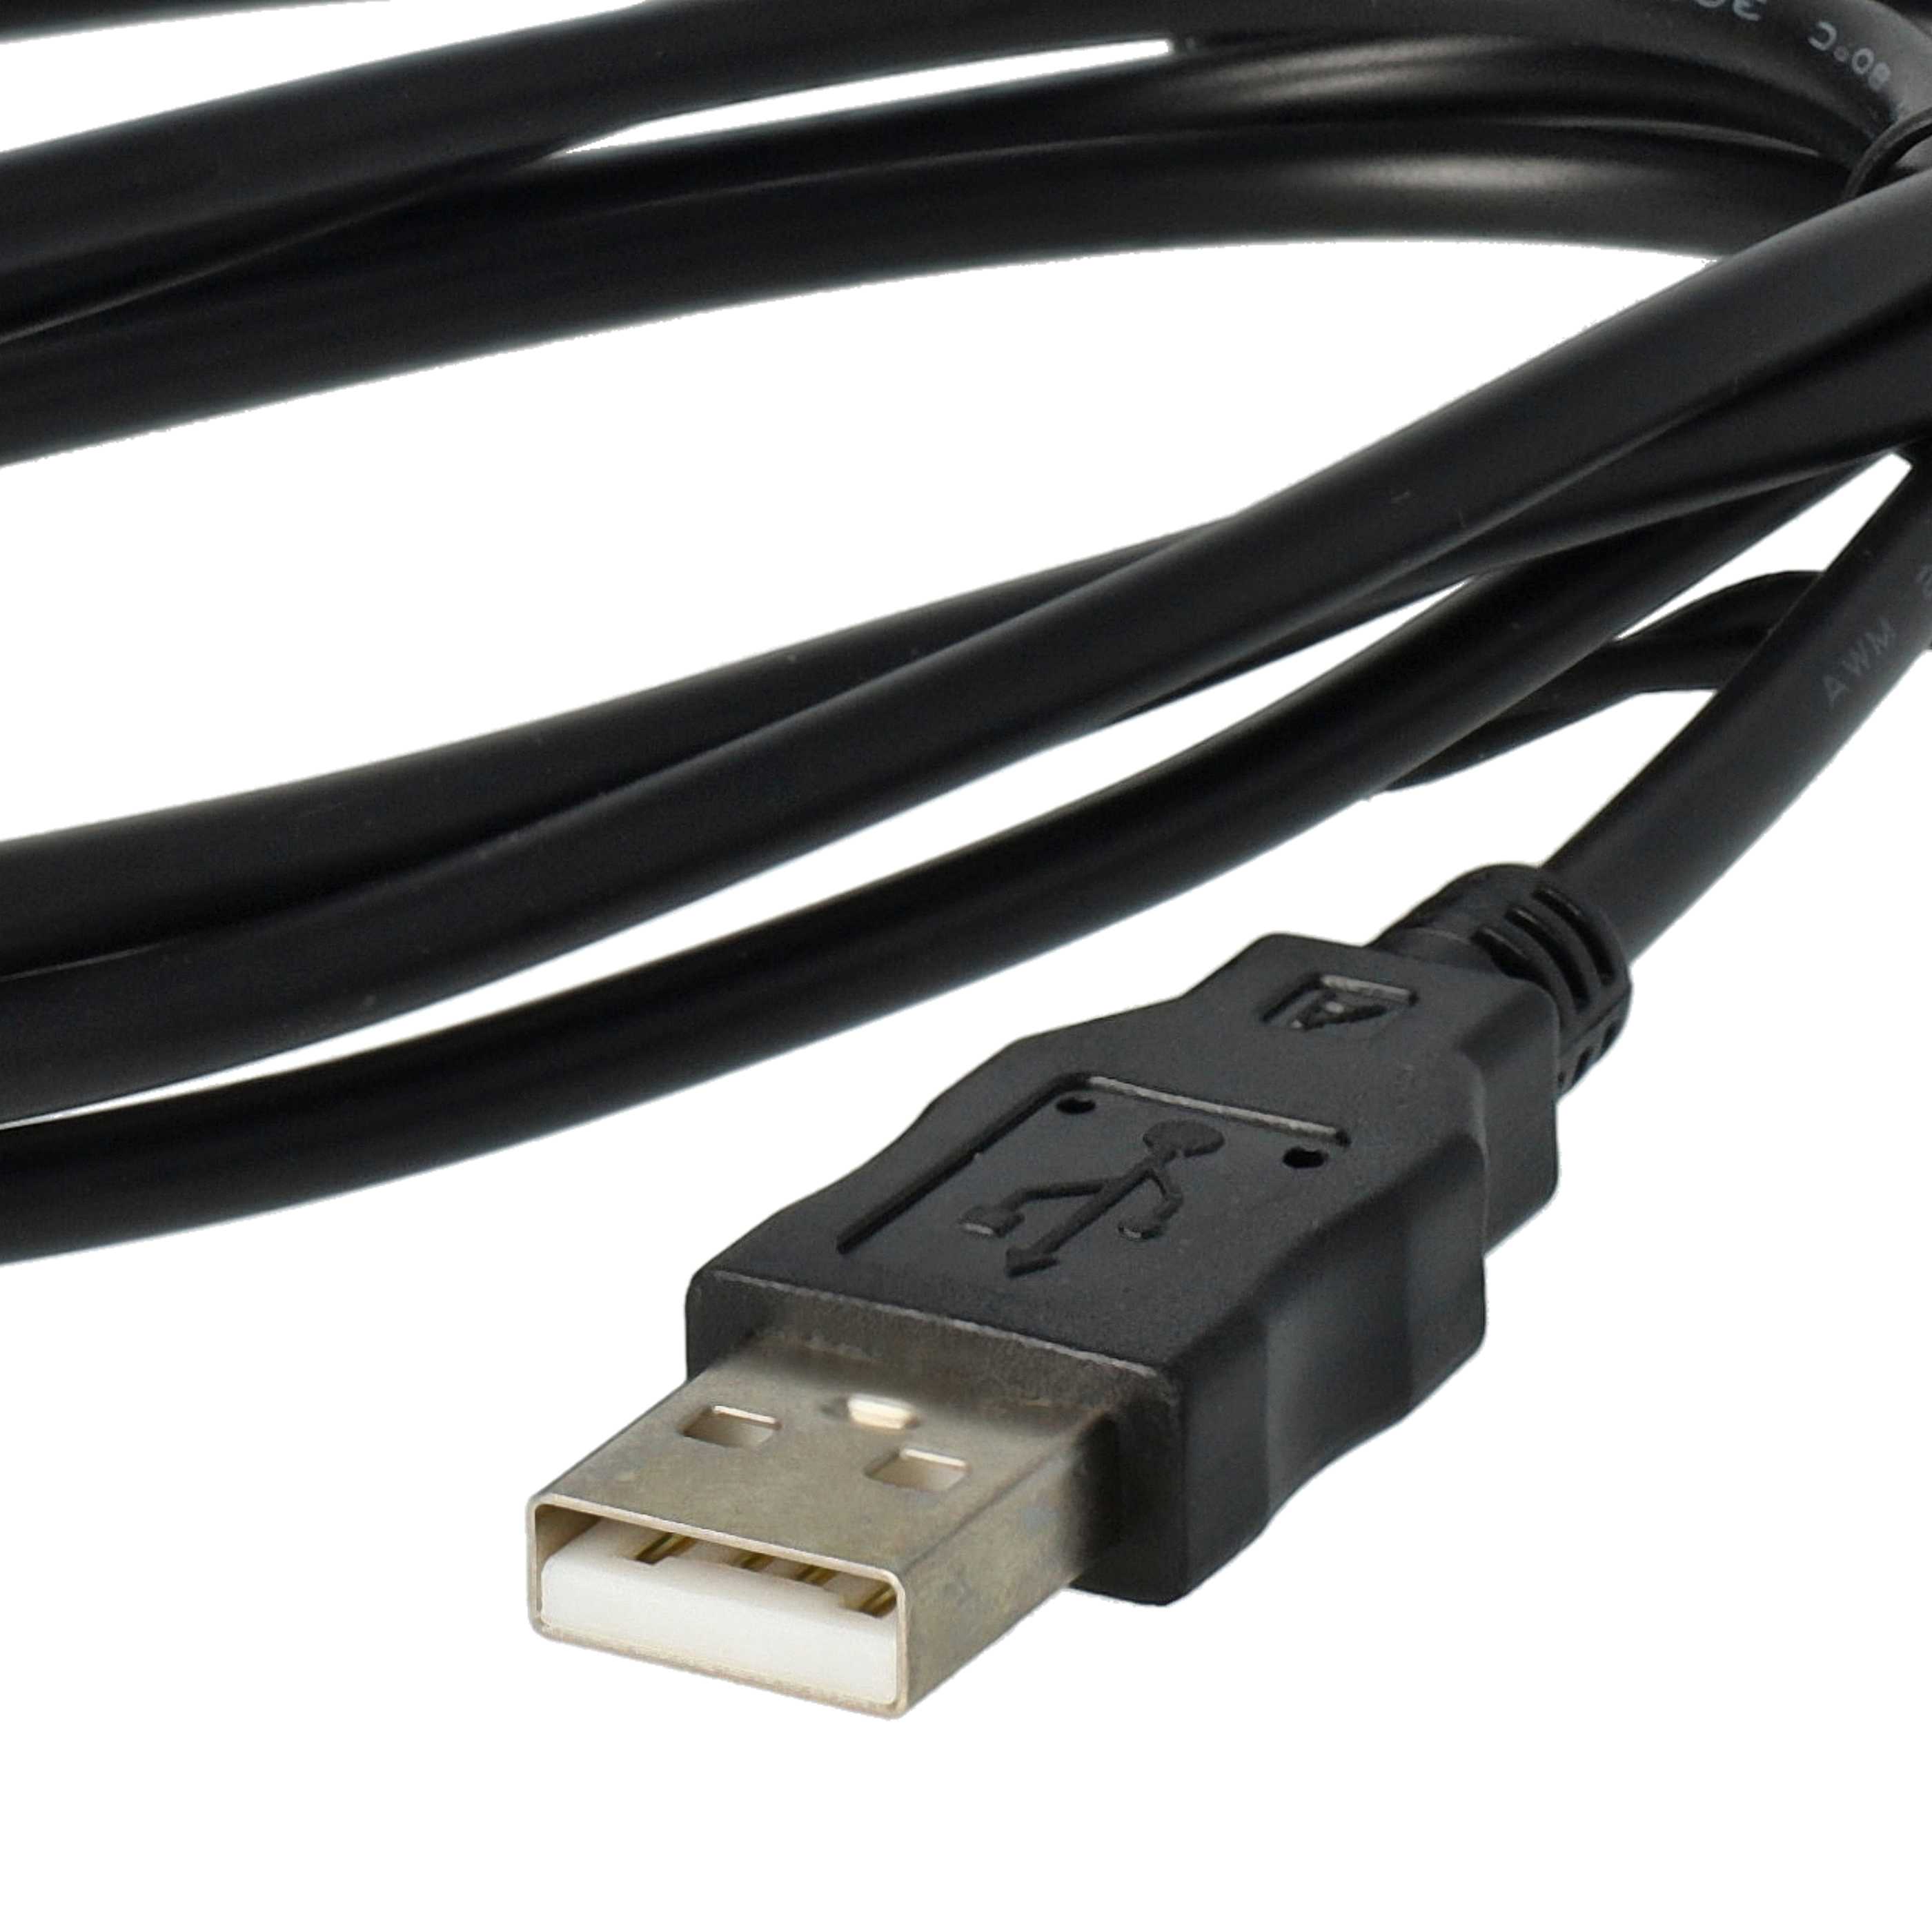 USB Data Cable replaces Sony VMC-MD3 (without AV function) for Sony Camera - 150 cm